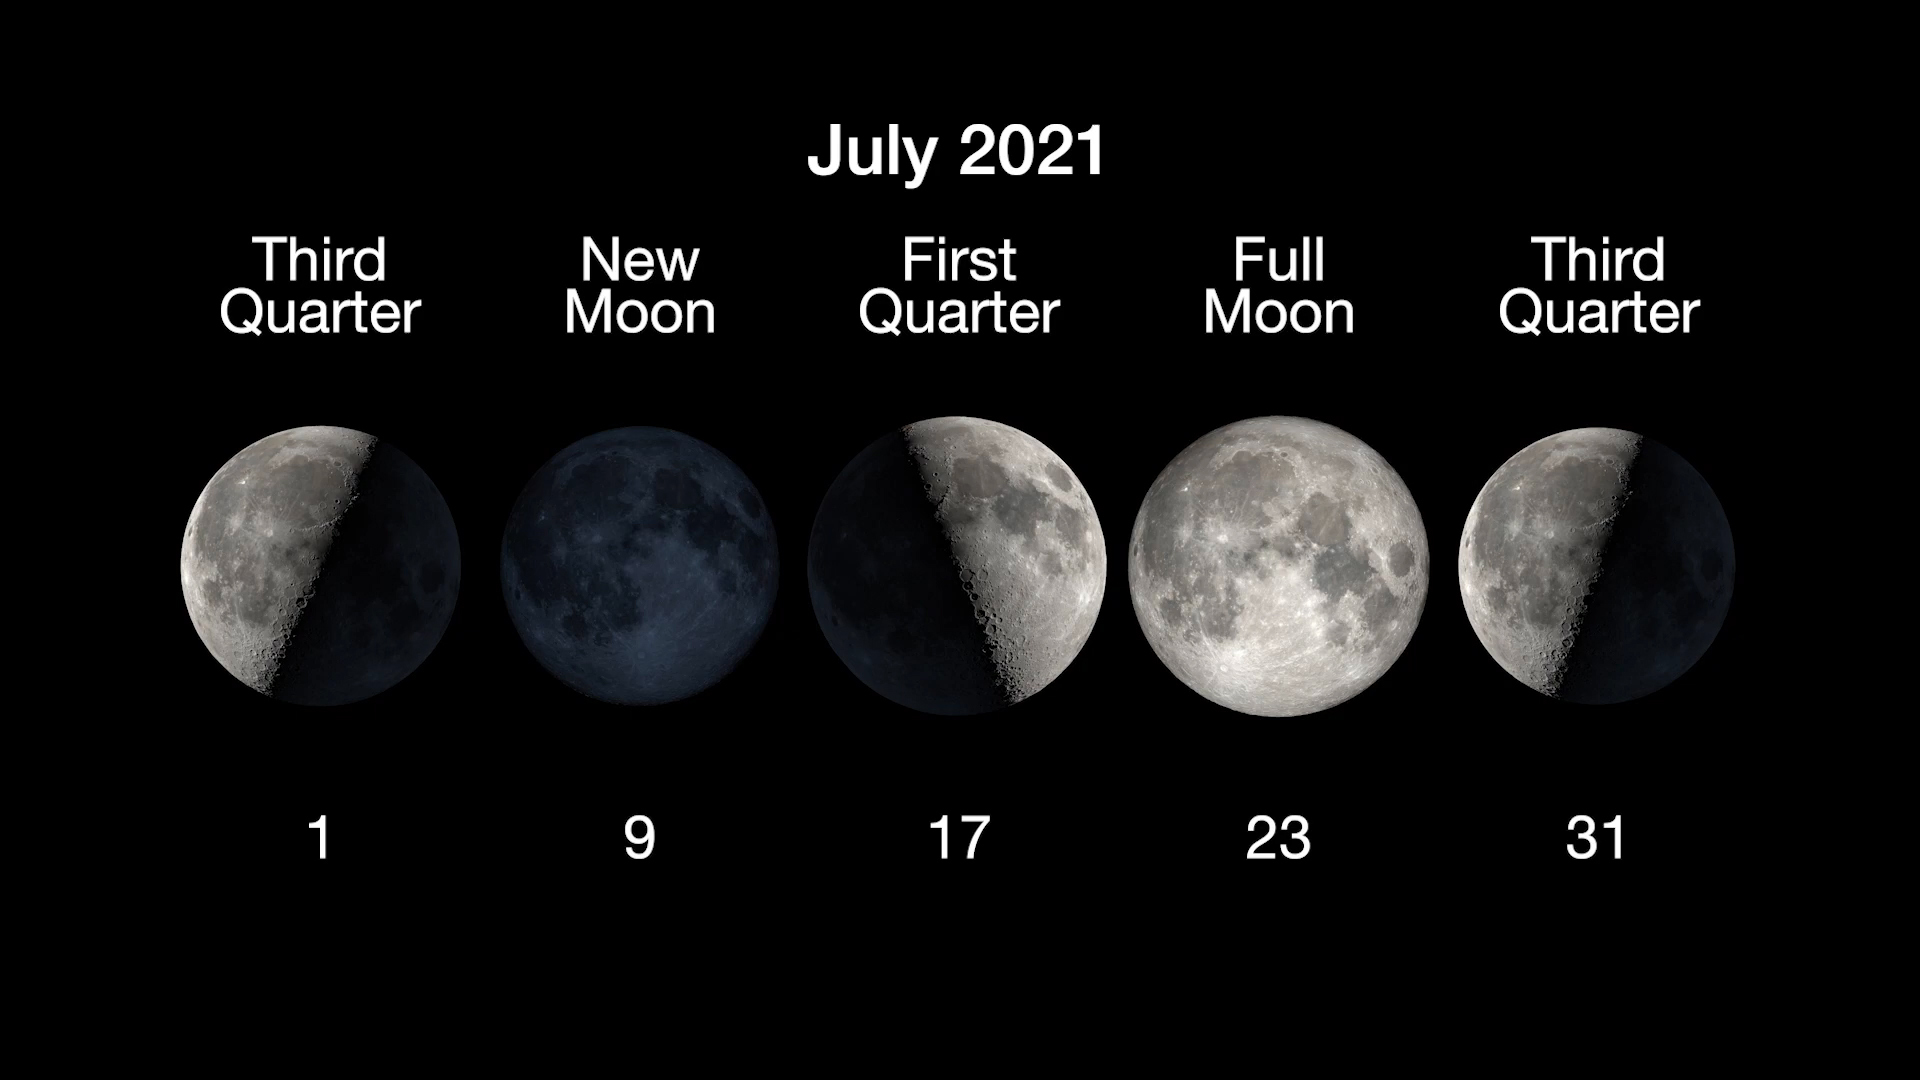 MoonPhases_July2021.jpg